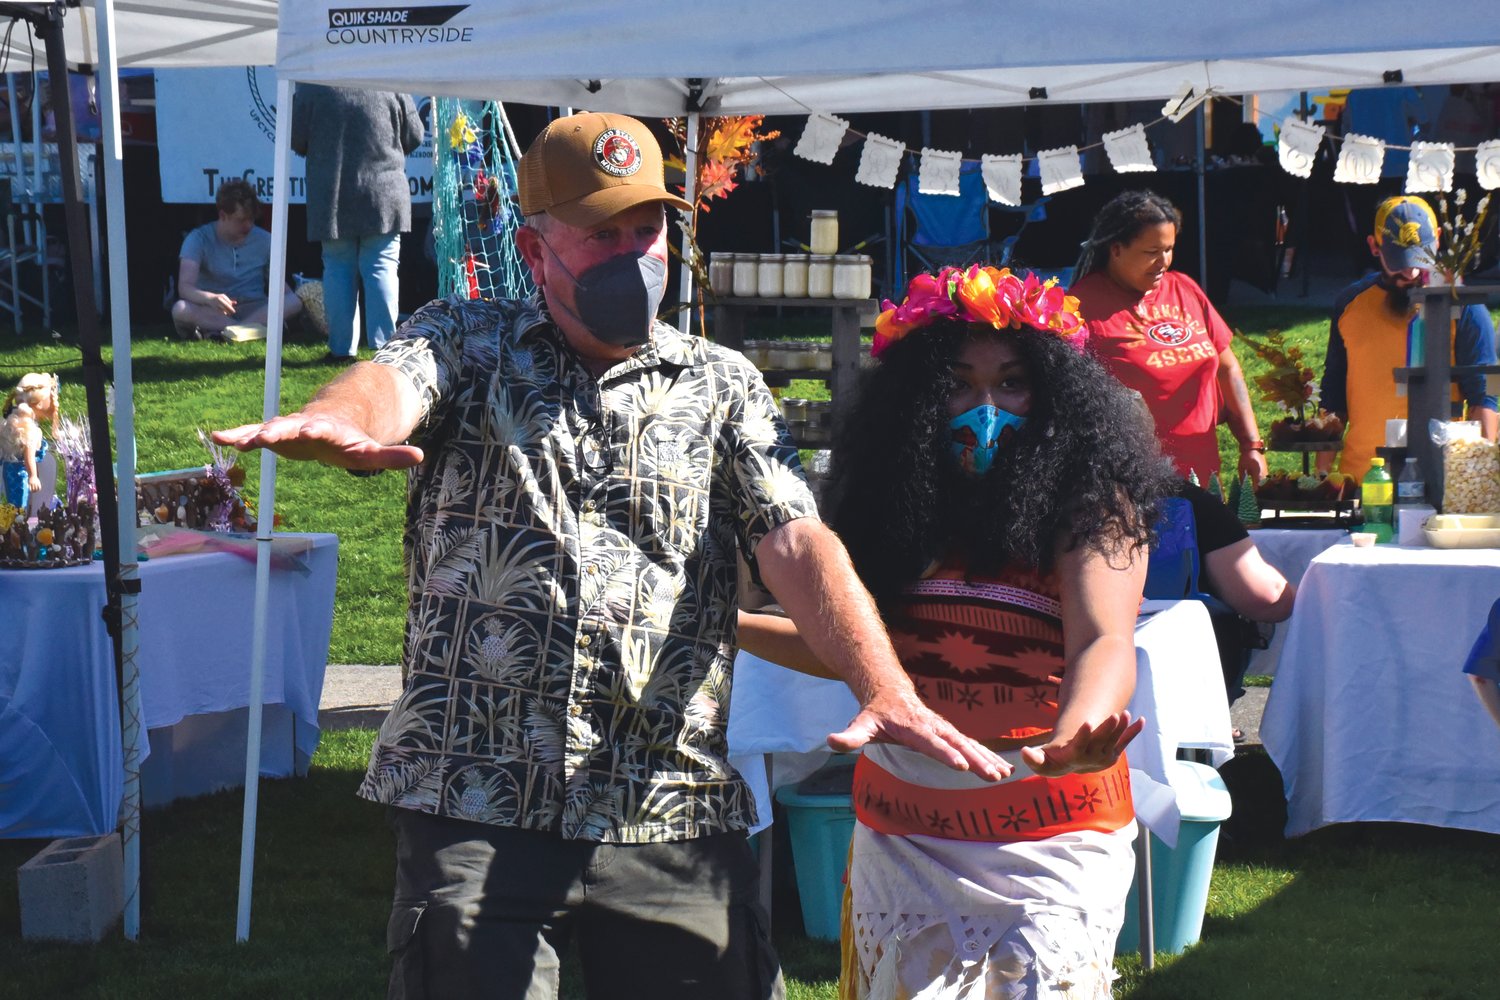 Mayor JW Foster surfs with Moana at the Yelm Fall Harvest Festival on Saturday, Sept. 25 at Yelm City Park.